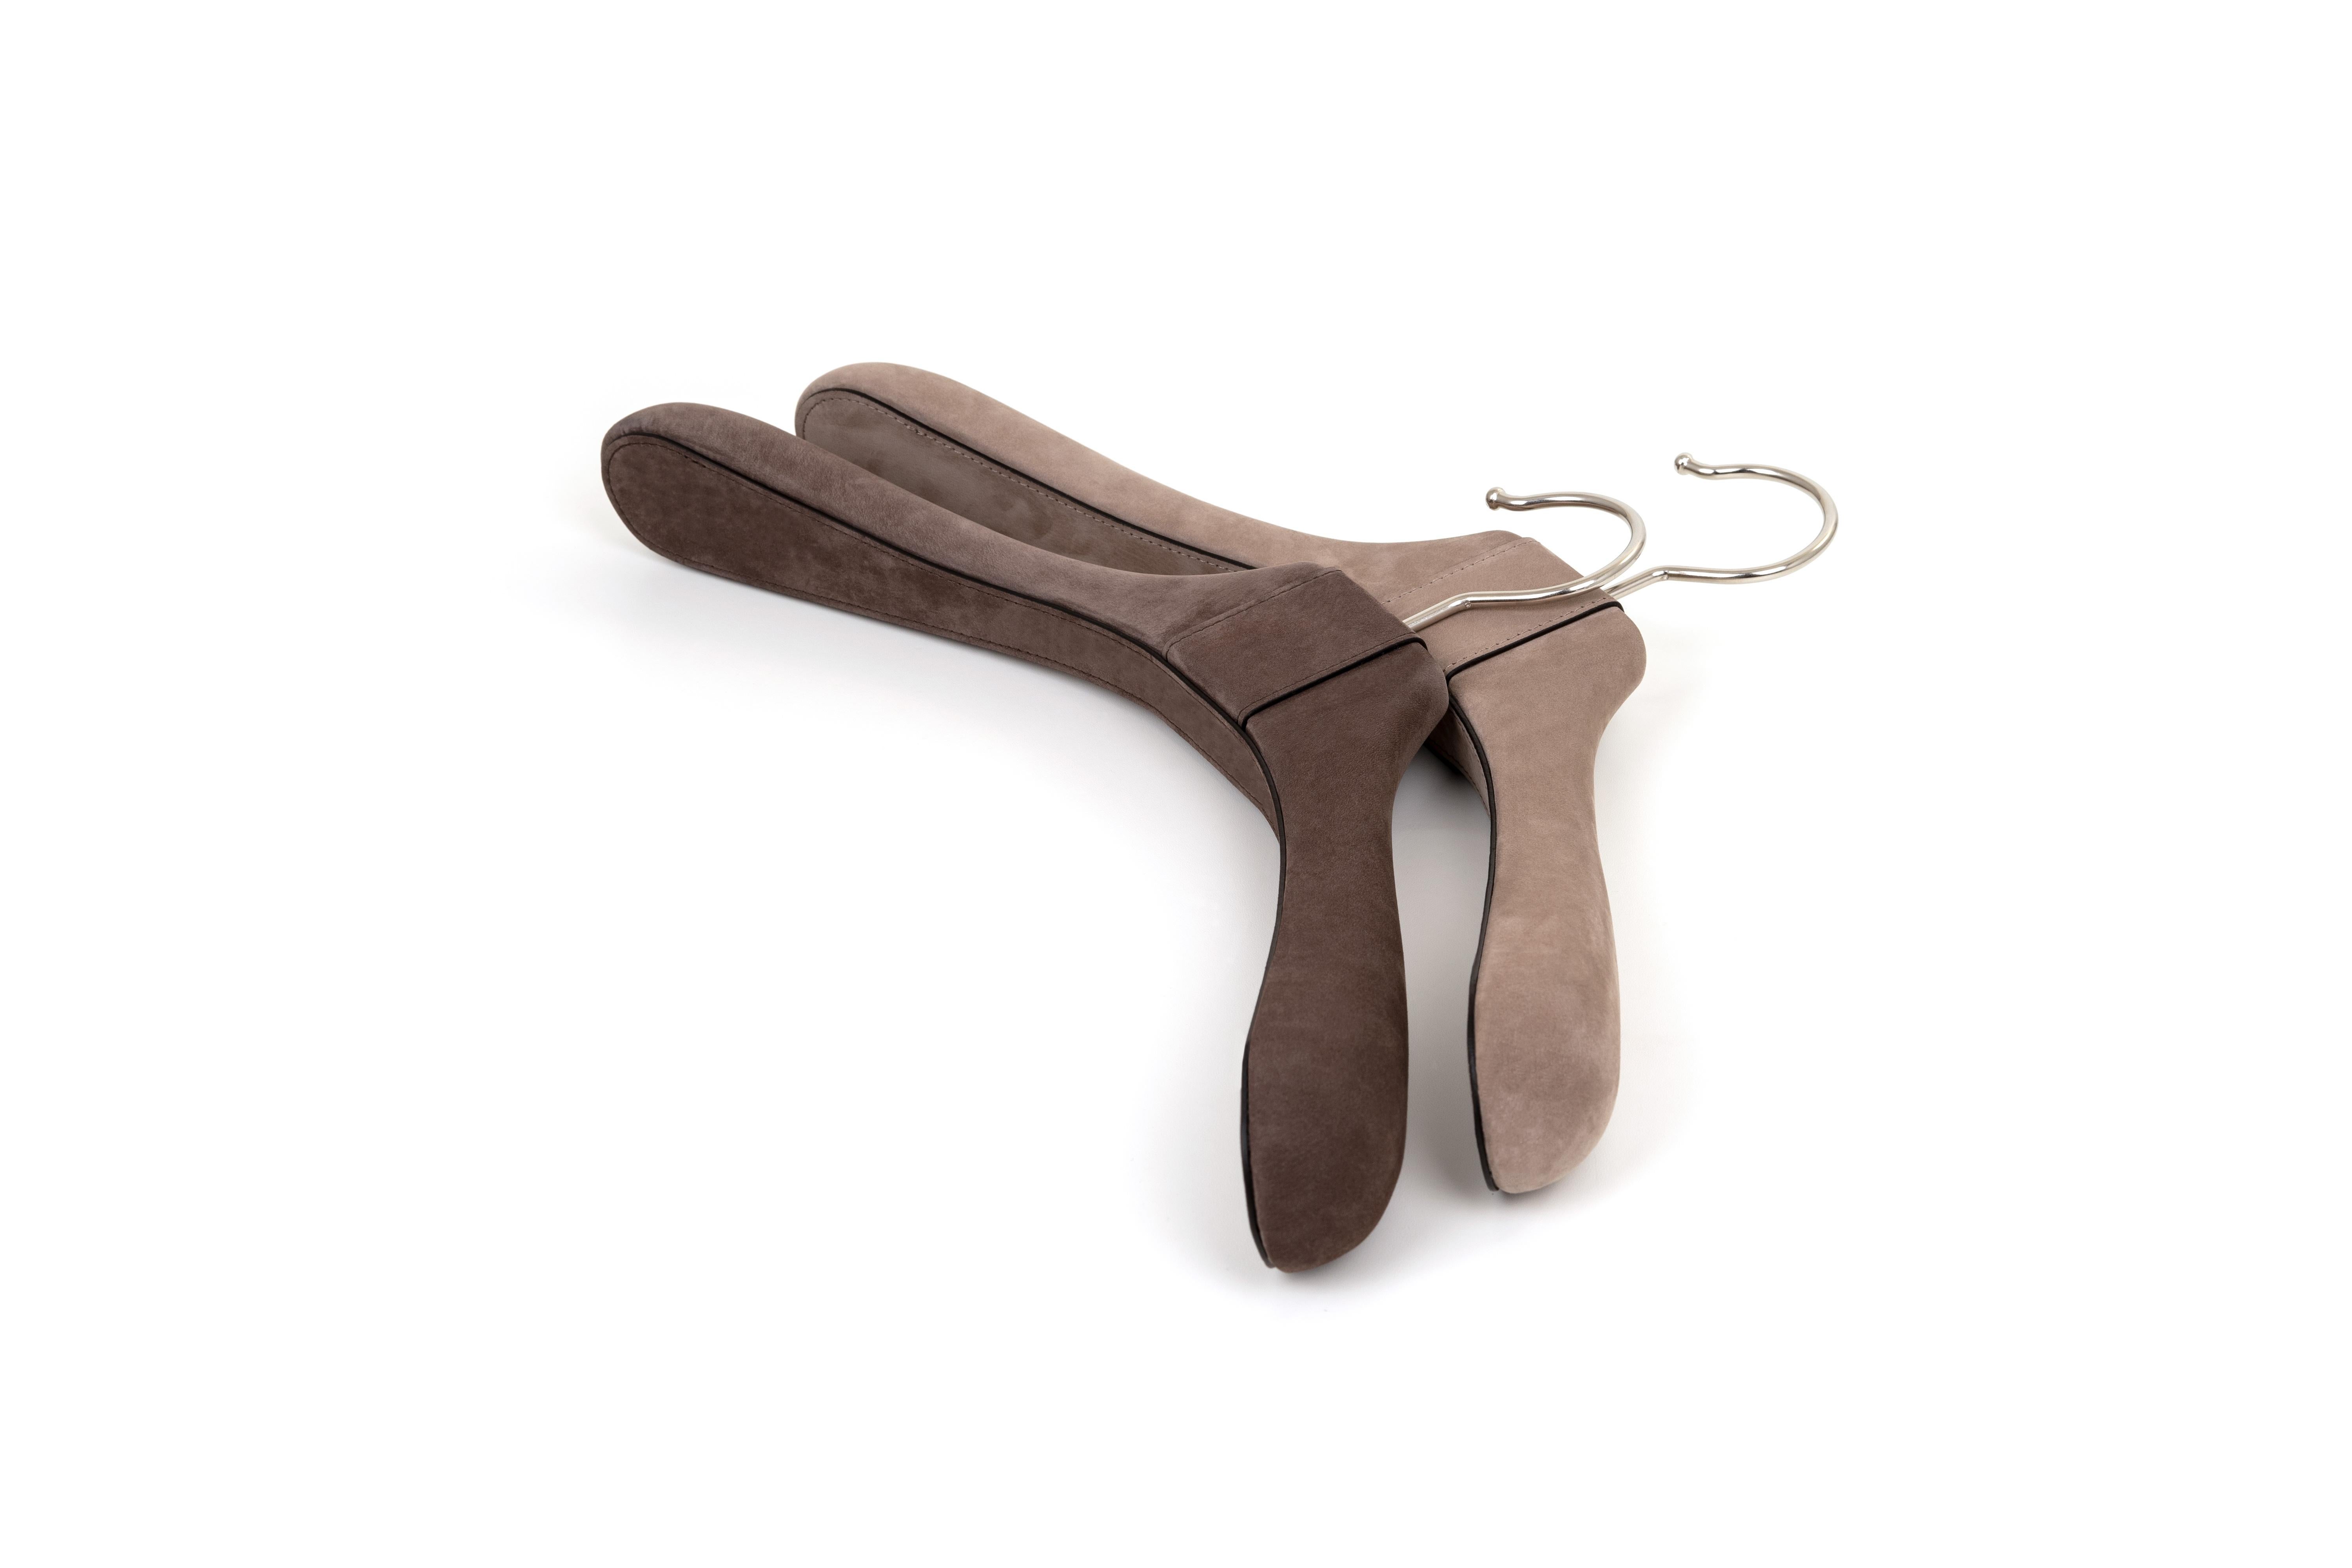 Contemporary 21st Century Coat Hanger Full Covered in Real Leather Handcrafted in Italy For Sale